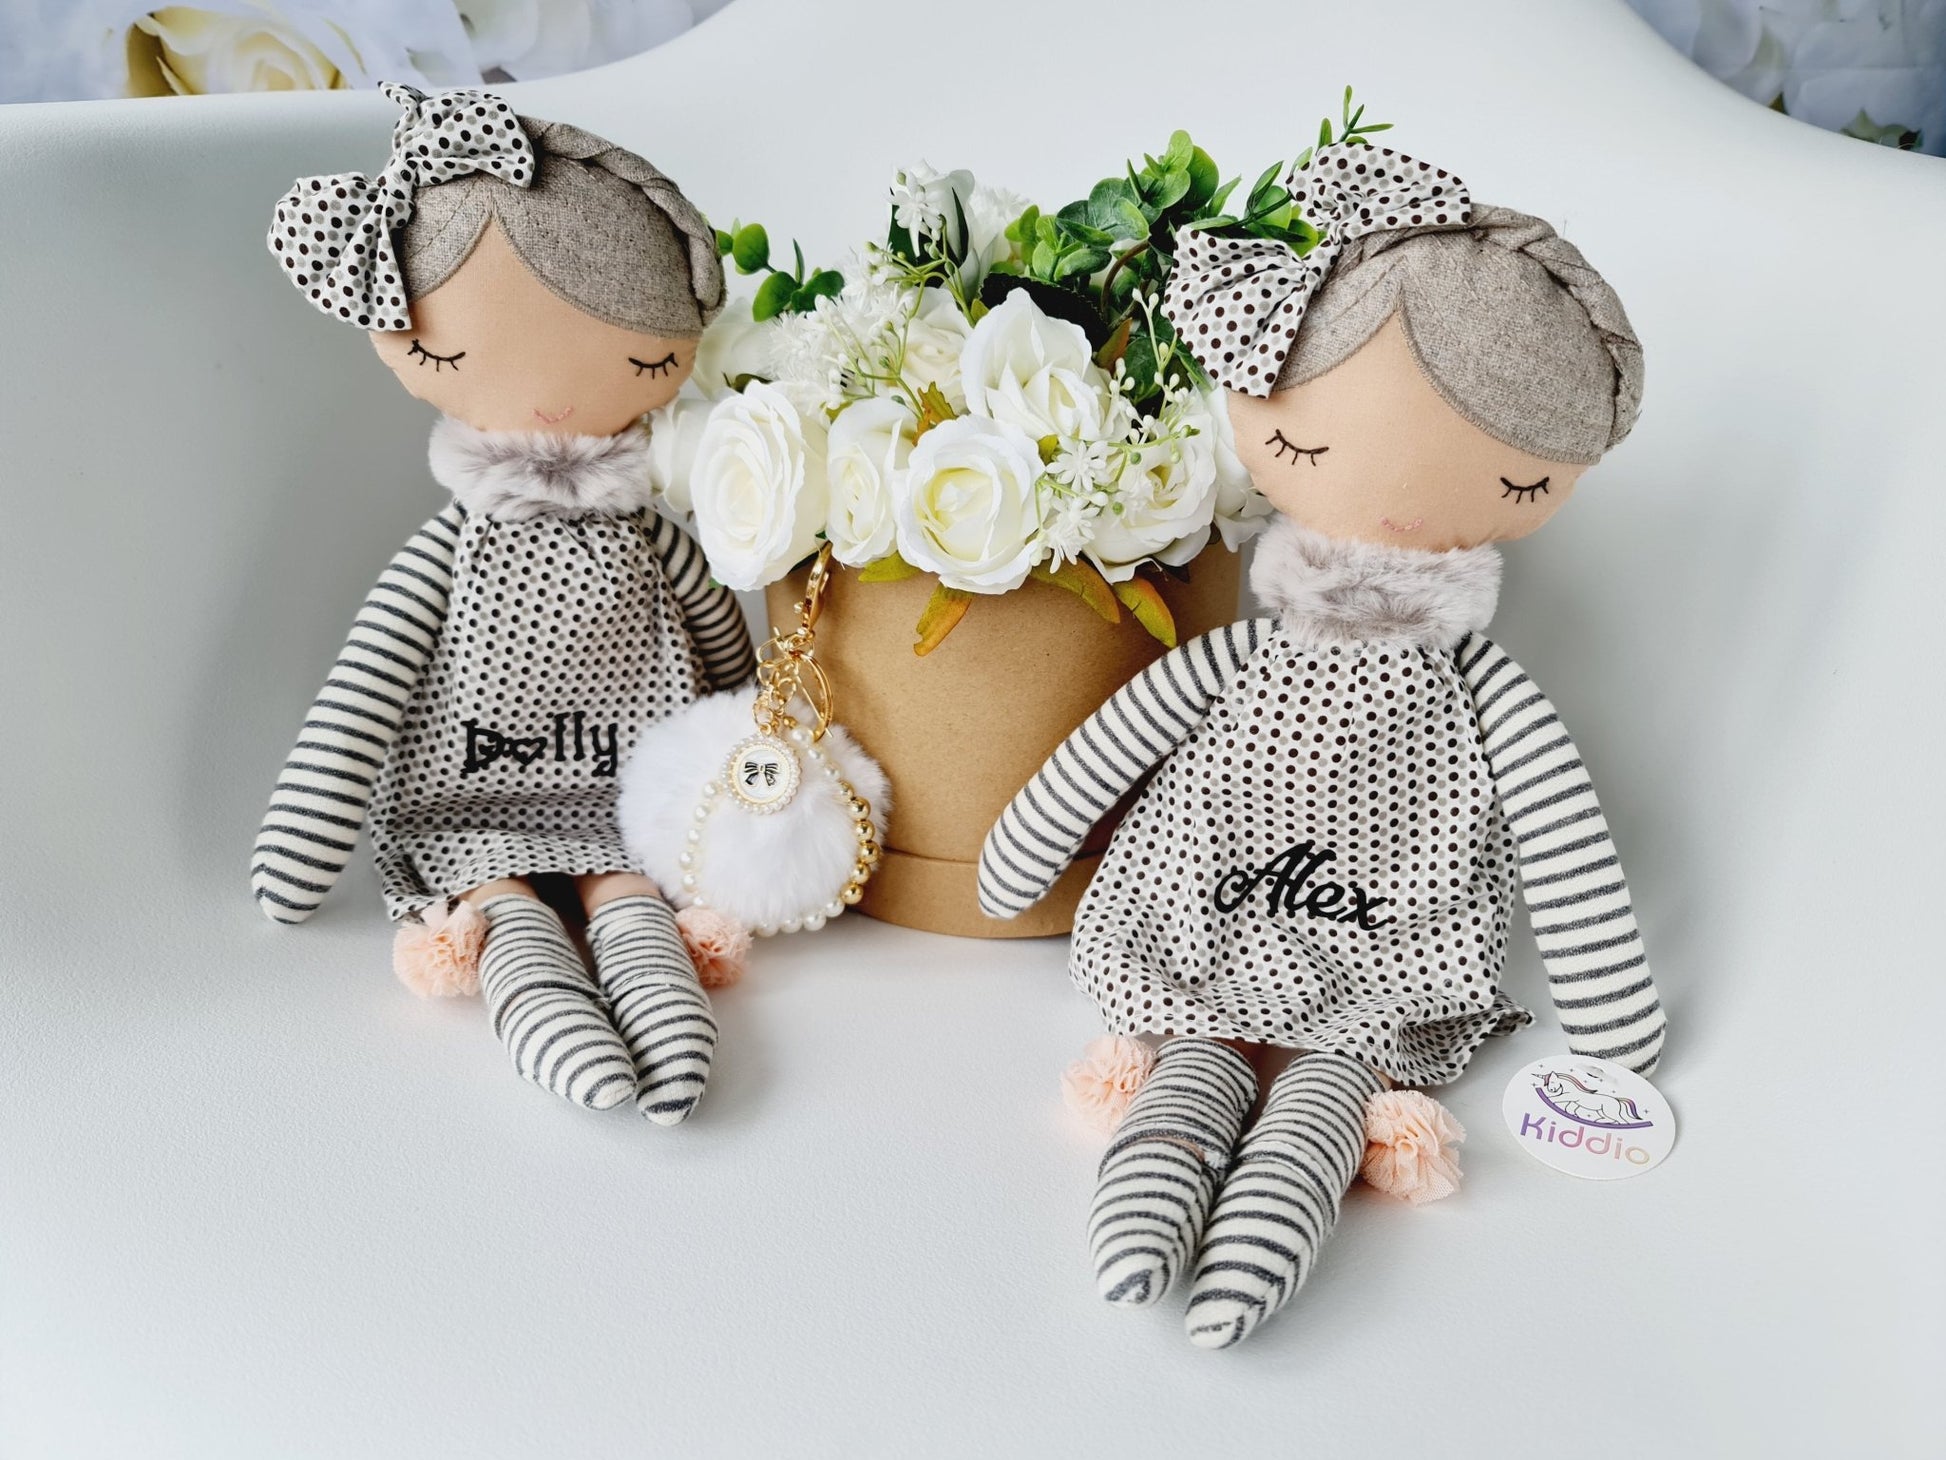 Personalised Rag Doll Lucy from WilberryKiddioSoft Toys